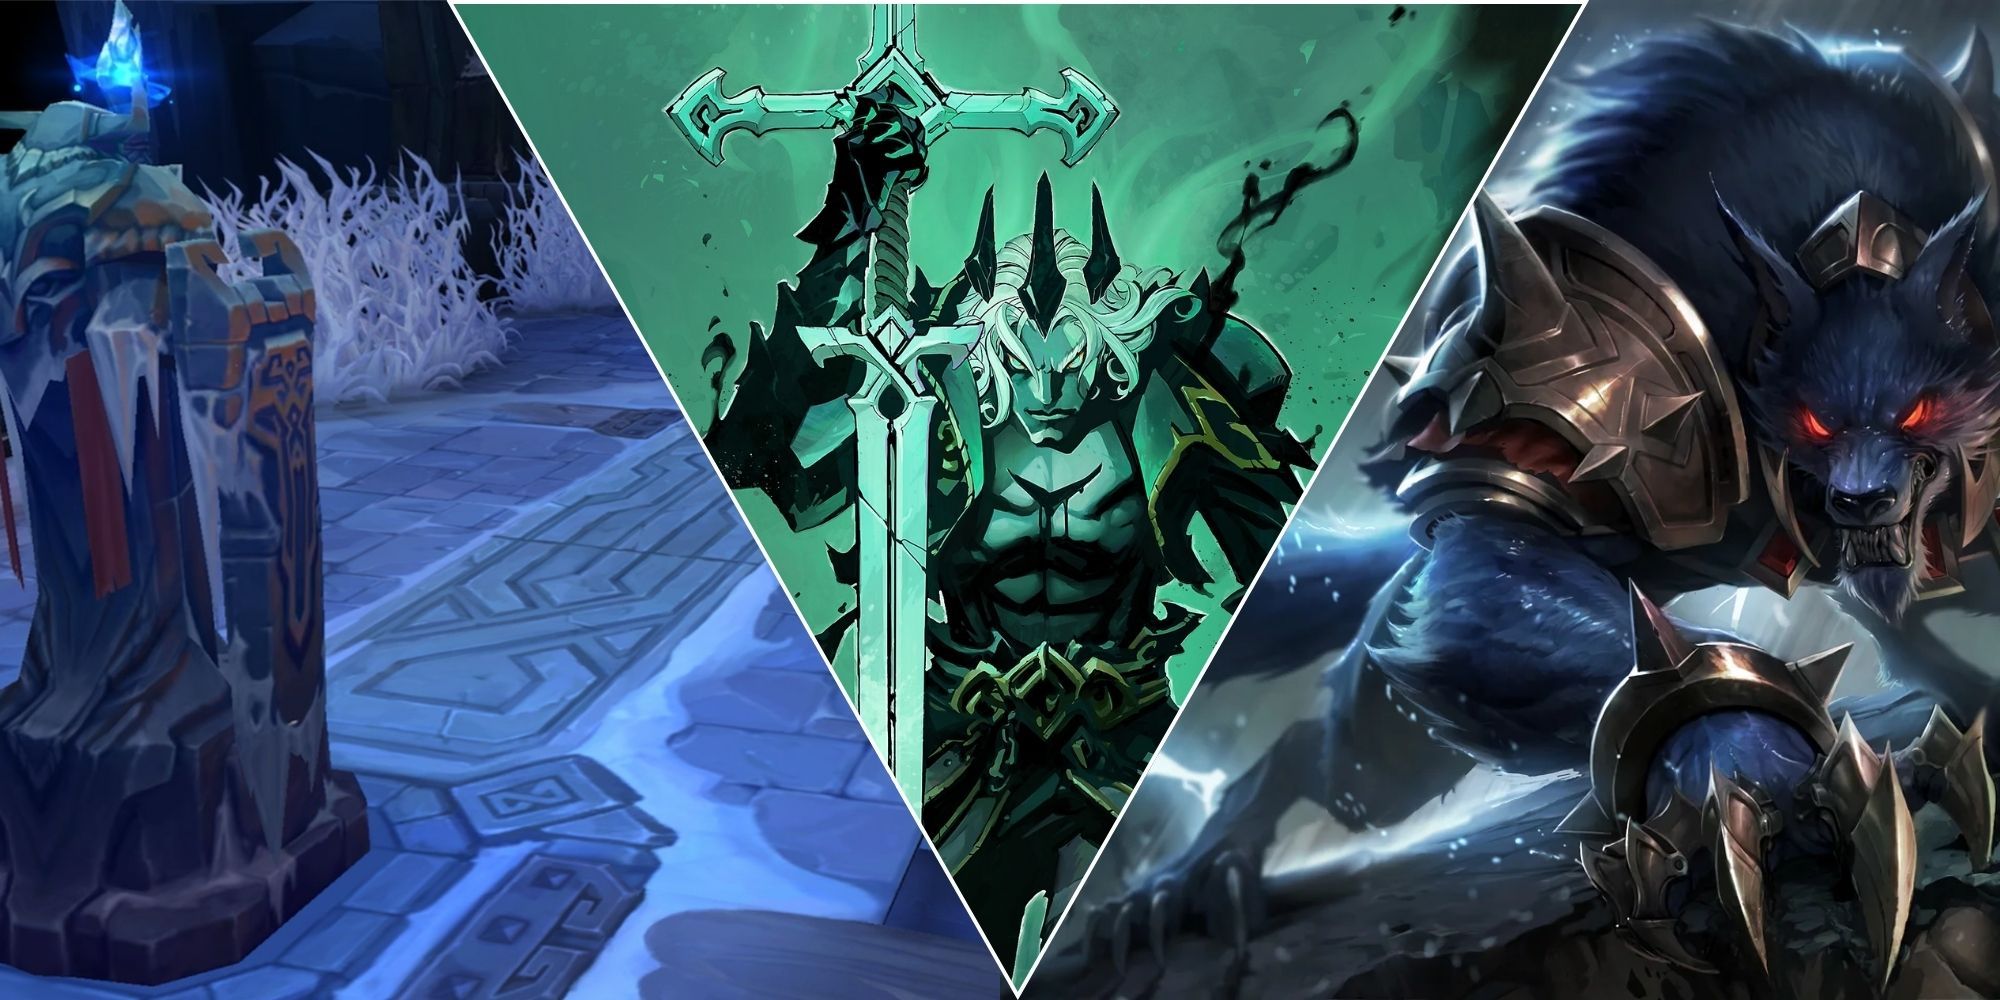 From the origins of the Void and the Black Mist, to the mysteries of the Watchers and the Ruined King, there is a lot to learn about the lore of League of Legends.